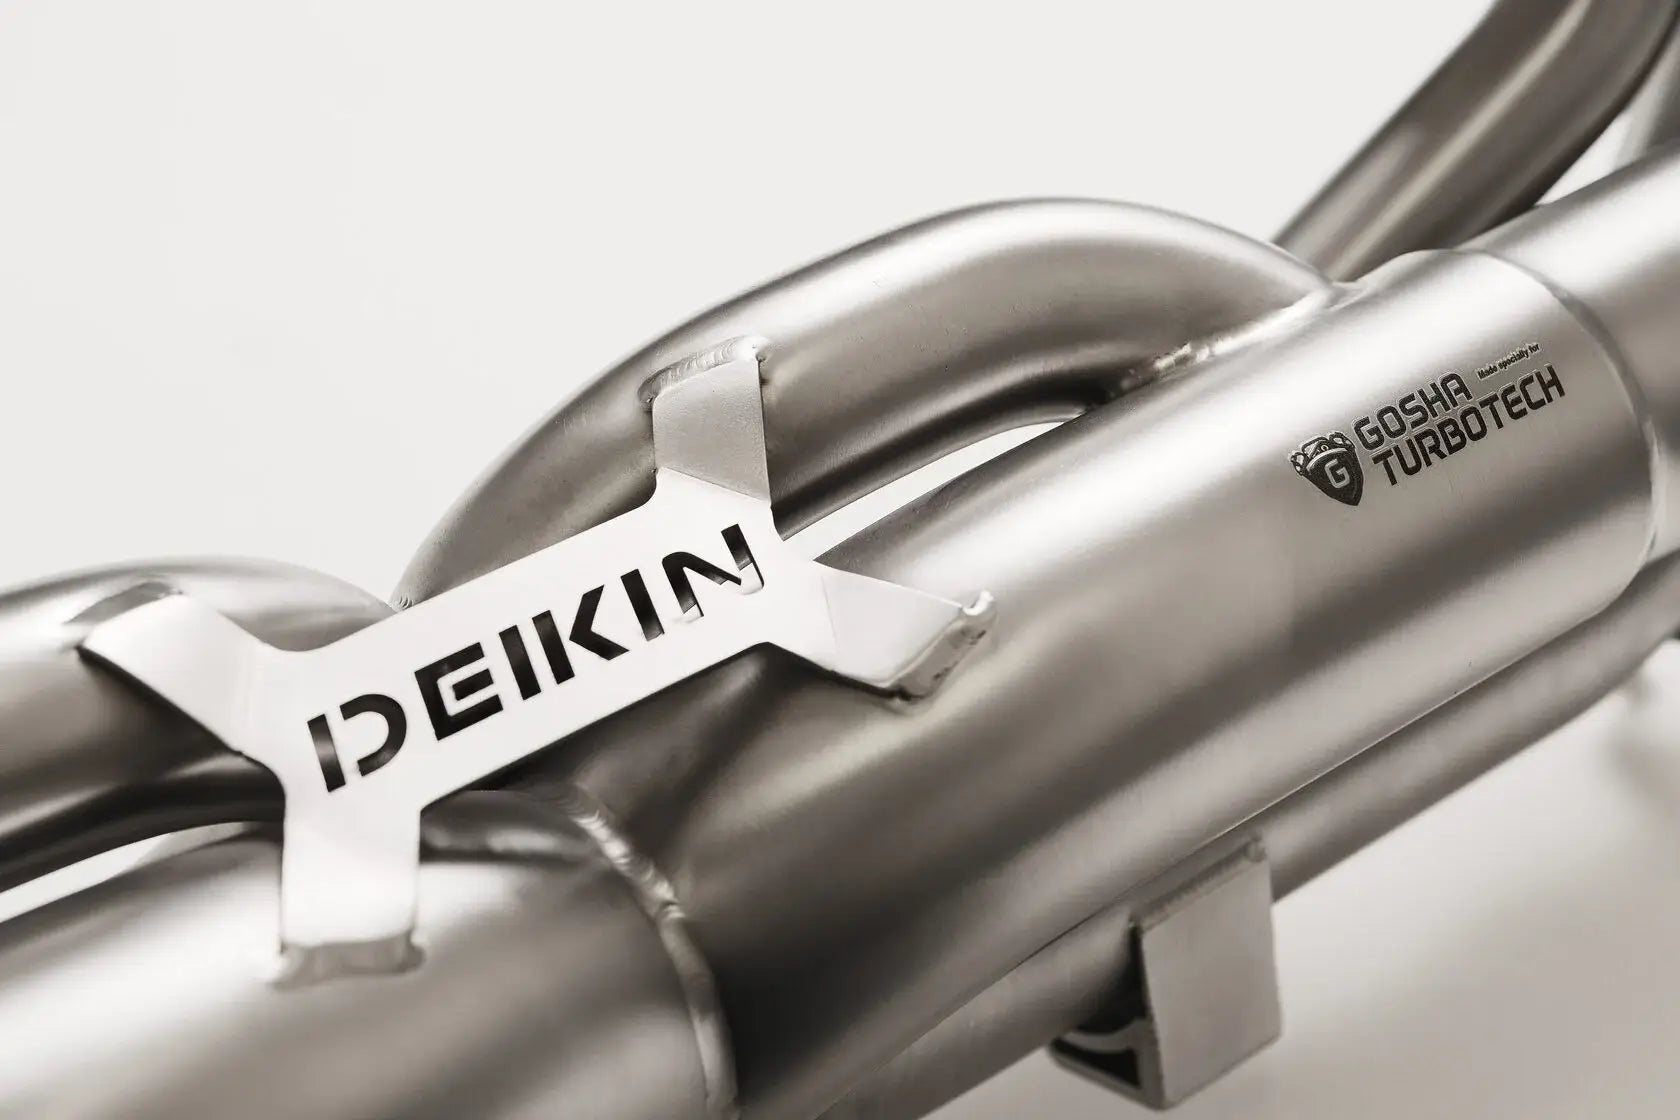 DEIKIN 10-PO.911.T/TS.992.R-ES-DP-Ti-00 Exhaust system "Race" Titan for Porsche 911 Turbo/Turbo S (992) complete with downpipes without HeatShield Photo-11 